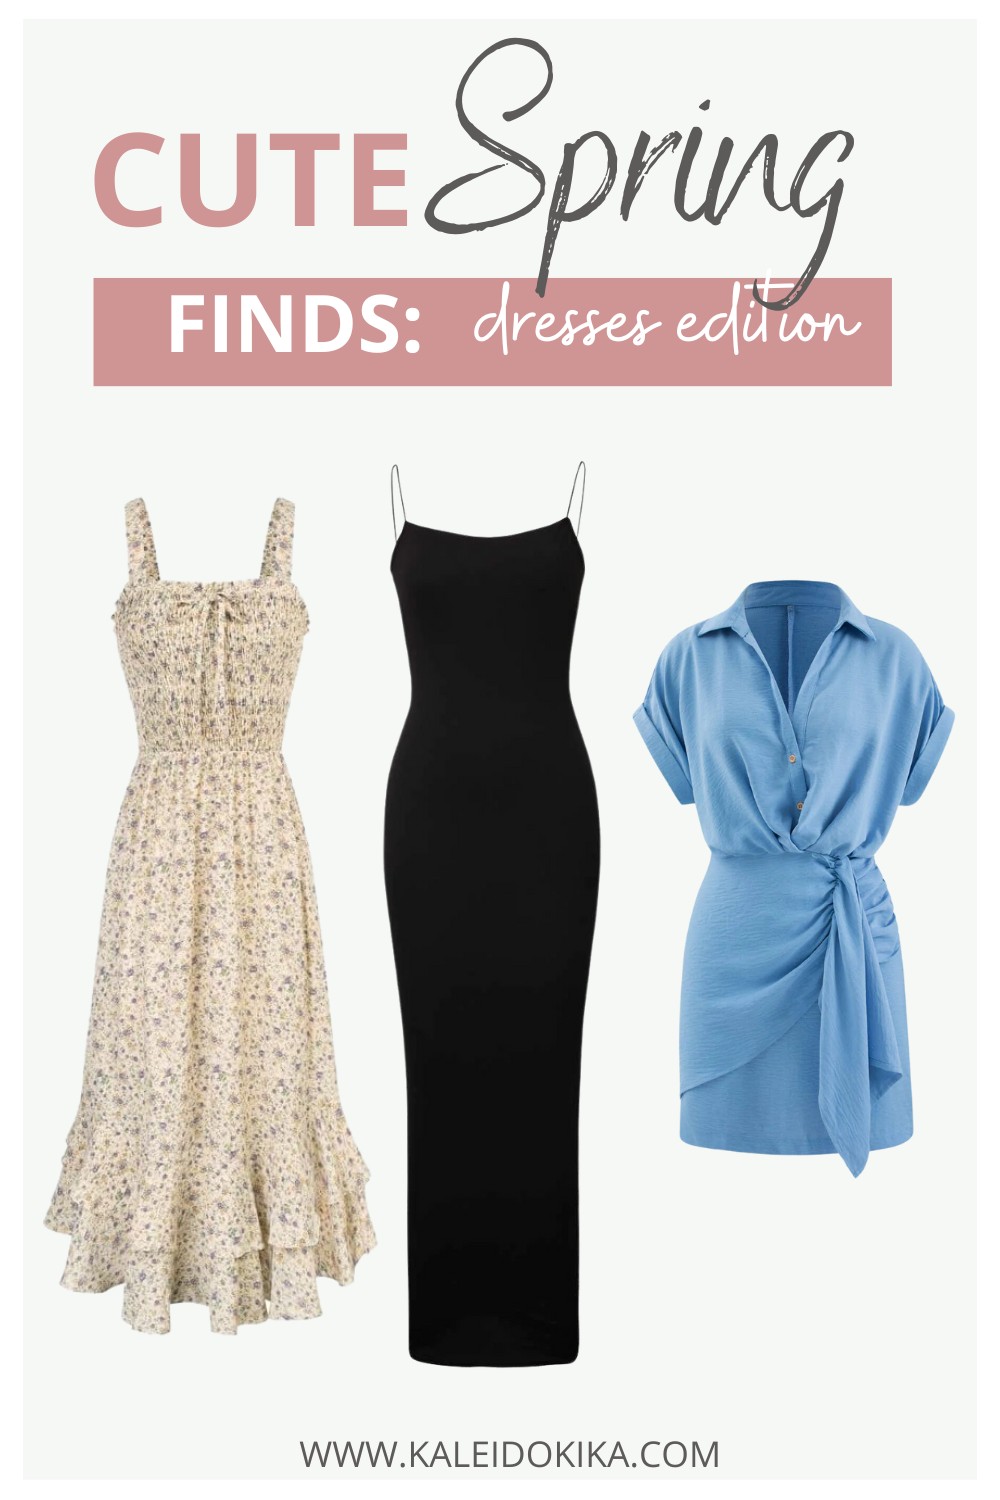 Image showing some cute dresses for spring for women